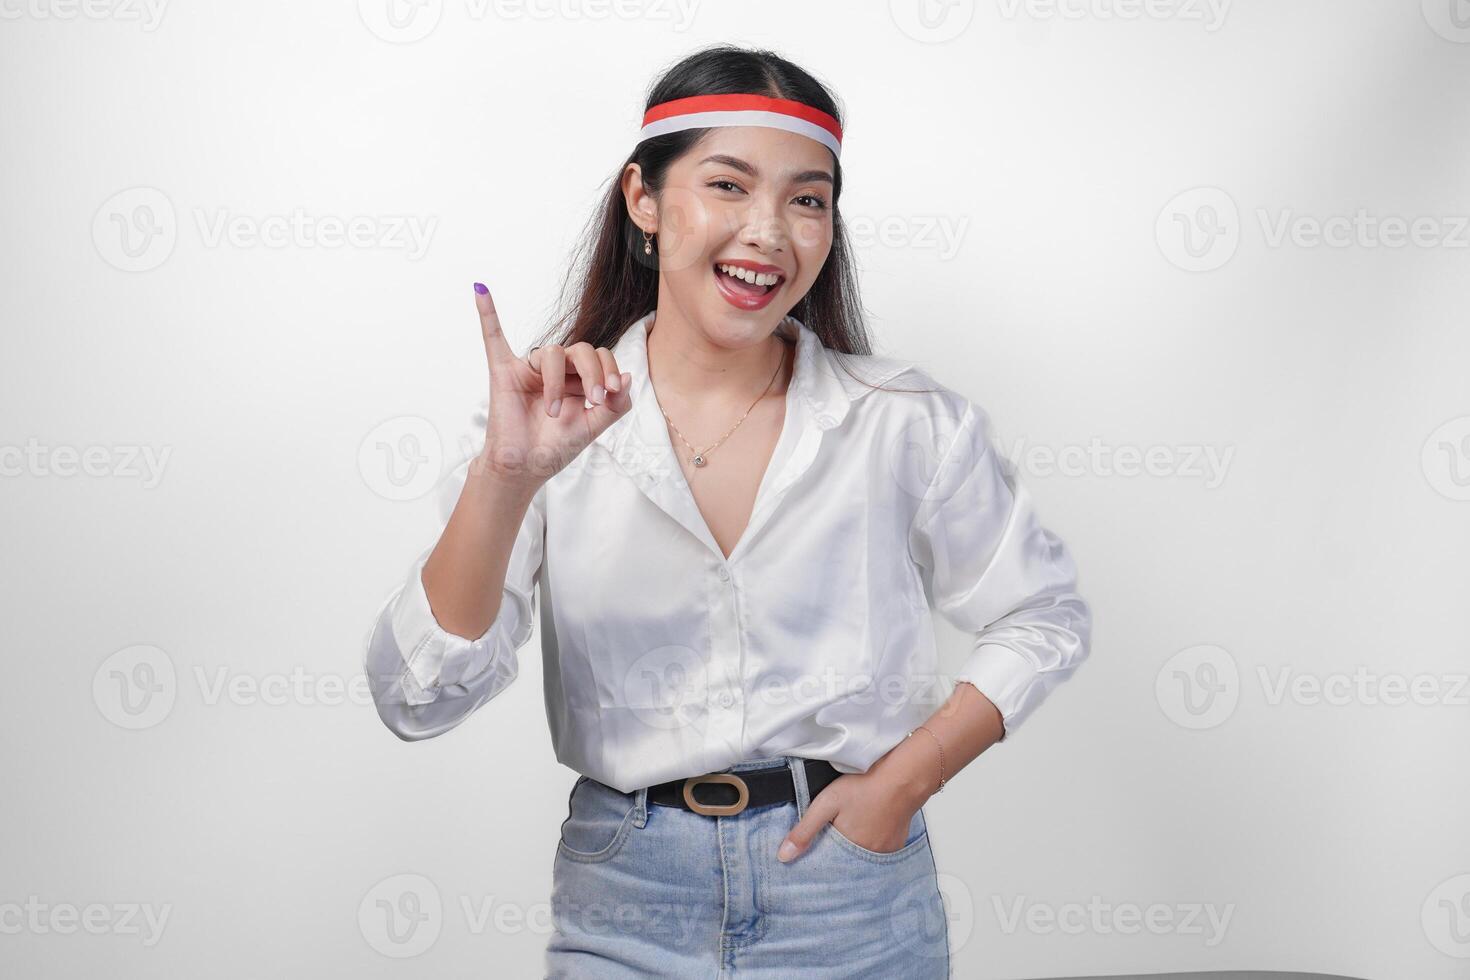 Young Asian woman proudly showing little finger dipped in purple ink after voting for president and parliament election, expressing excitement and happiness, wearing flag headband and white shirt photo